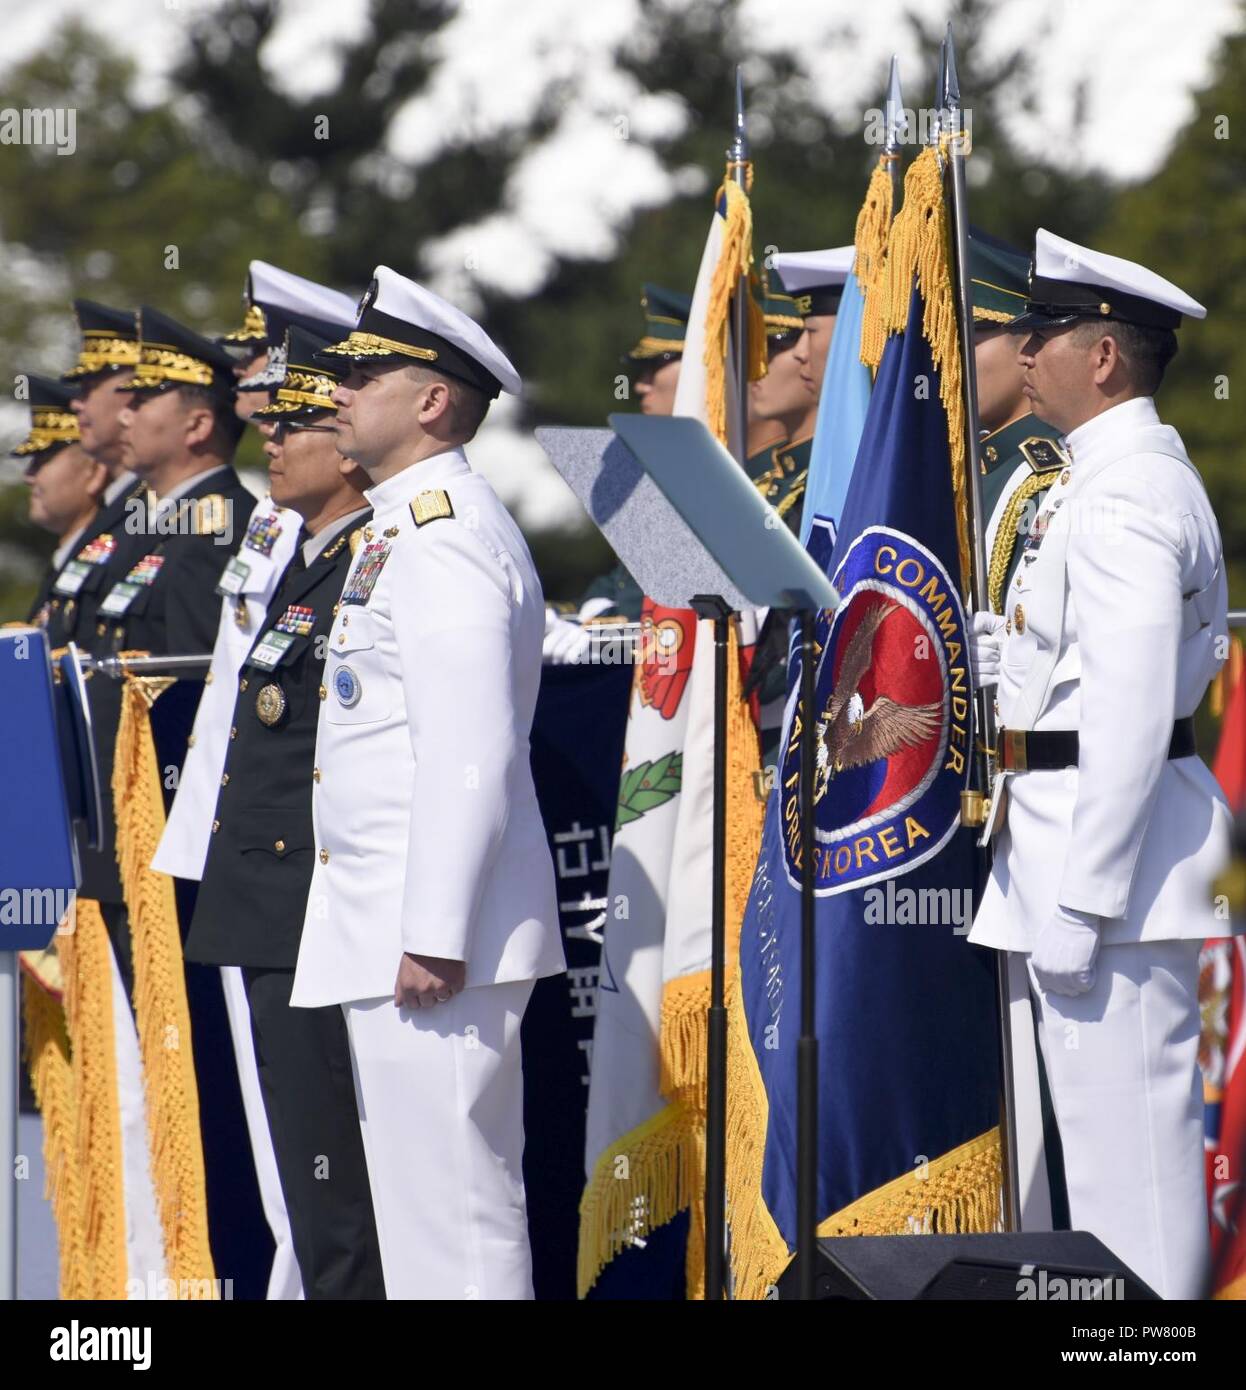 PYEONGTAEK, Republic of Korea (Sept. 28, 2017) Republic of Korea (ROK) Rear Adm. Brad Cooper, commander, Naval Forces Korea (CNFK) and Master Chief Chris Stone, CNFK command master chief, stand during the 69th annual ROK Armed Forces Day Ceremony. Armed Forces Day comemmorates the service of men and women in the ROK armed forces, the day that South Korea broke through the 38th parallel during the Korean War in 1950. Cooper is also presented the Presidential Unit Citation by ROK President Moon, Jae-in, this is the first time a U.S. Navy command is presented this award since the end of the Korea Stock Photo